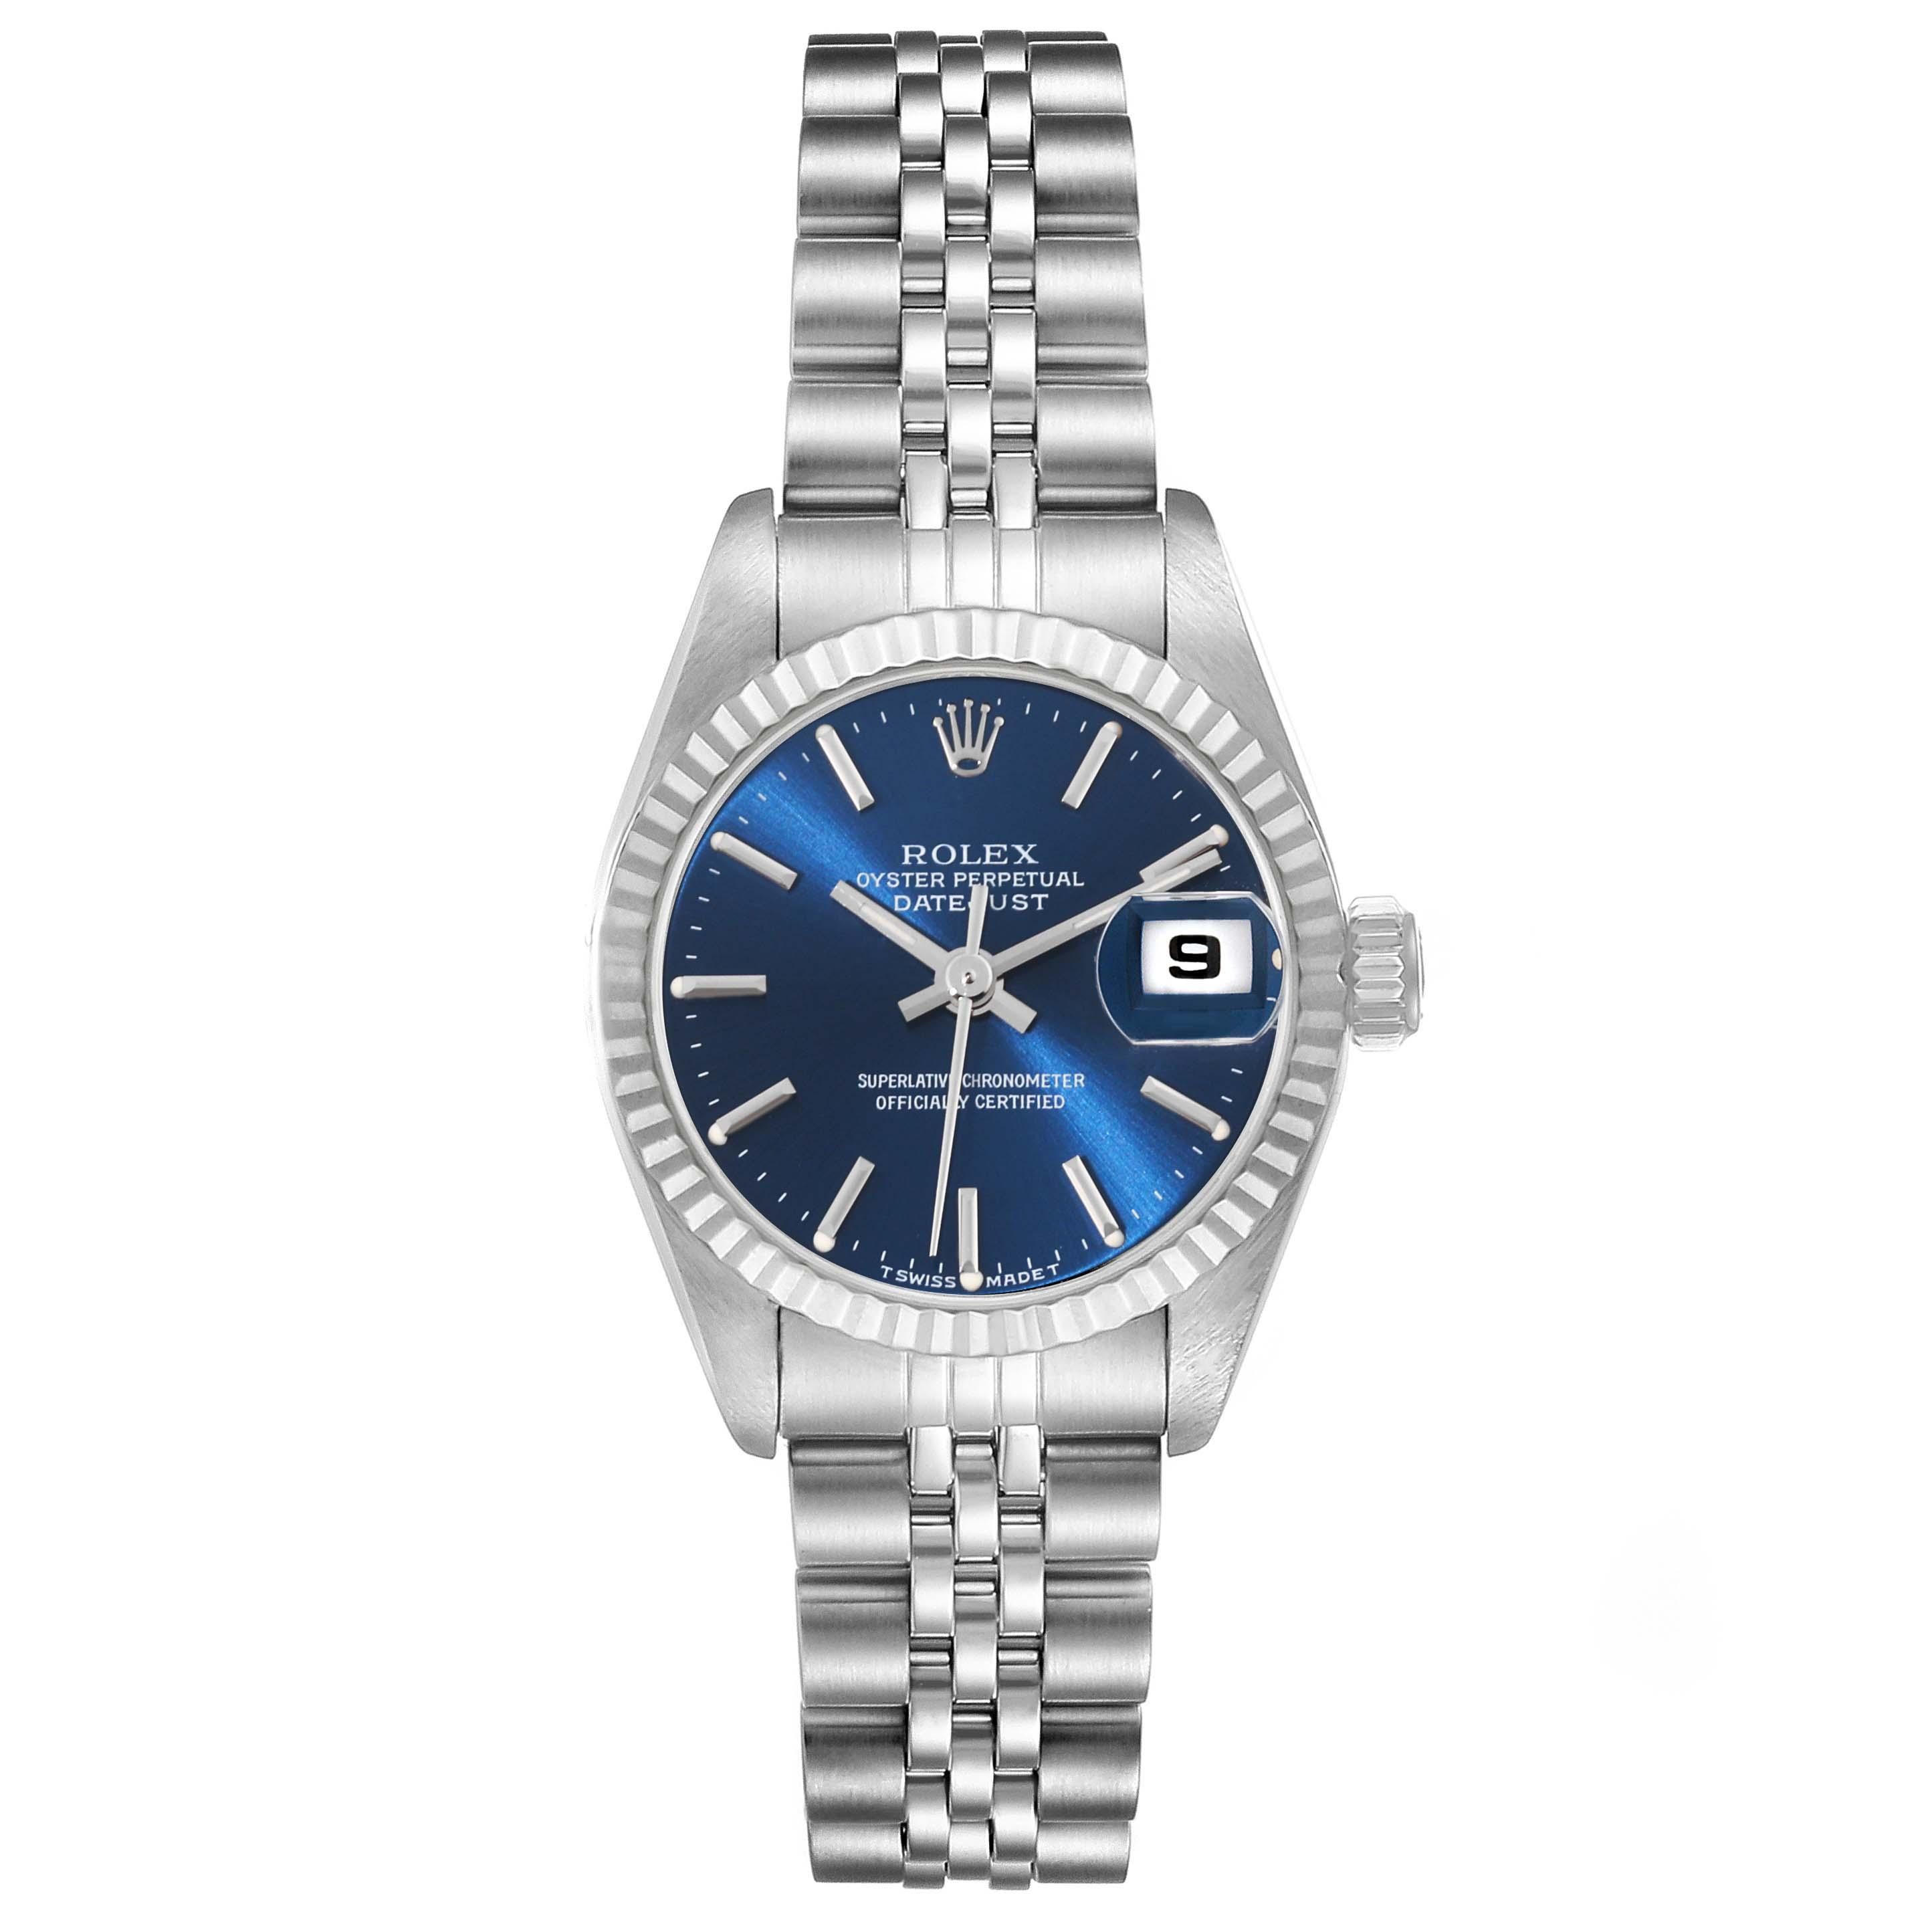 Rolex Datejust Steel White Gold Blue Dial Ladies Watch 69174 Box Papers. Officially certified chronometer automatic self-winding movement. Stainless steel oyster case 26 mm in diameter. Rolex logo on a crown. 18k white gold fluted bezel. Scratch